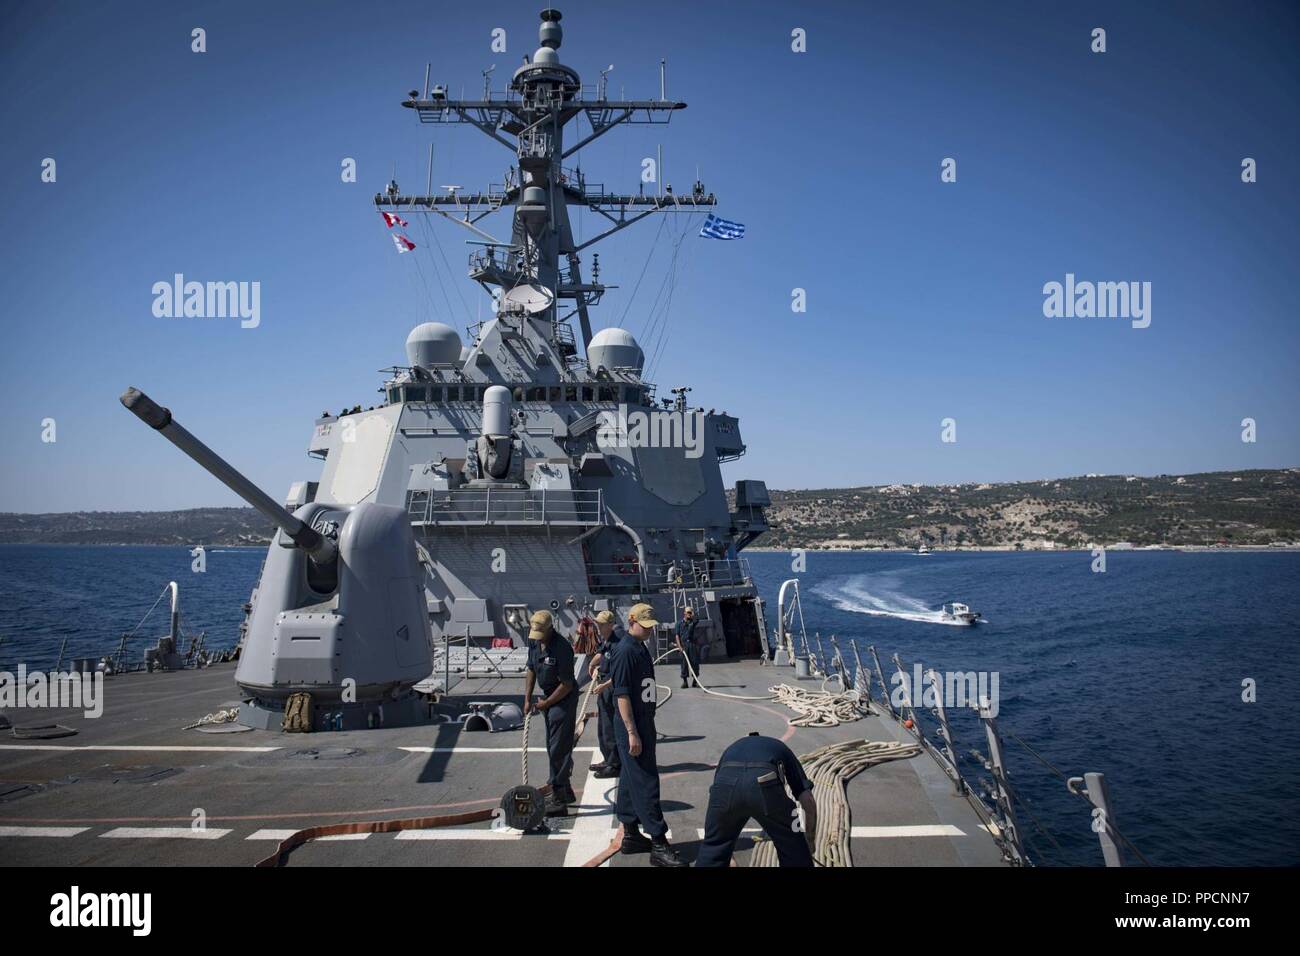 BAY, Greece (Sept. 2, 2018) The Arleigh Burke-class guided-missile destroyer USS Carney (DDG 64) departs Souda Bay, Greece, Sept. 2, 2018. Carney, forward-deployed to Rota, Spain, is on its fifth patrol in the U.S. 6th Fleet area of operations in support of regional allies and partners as well as U.S. national security interests in Europe and Africa. Stock Photo